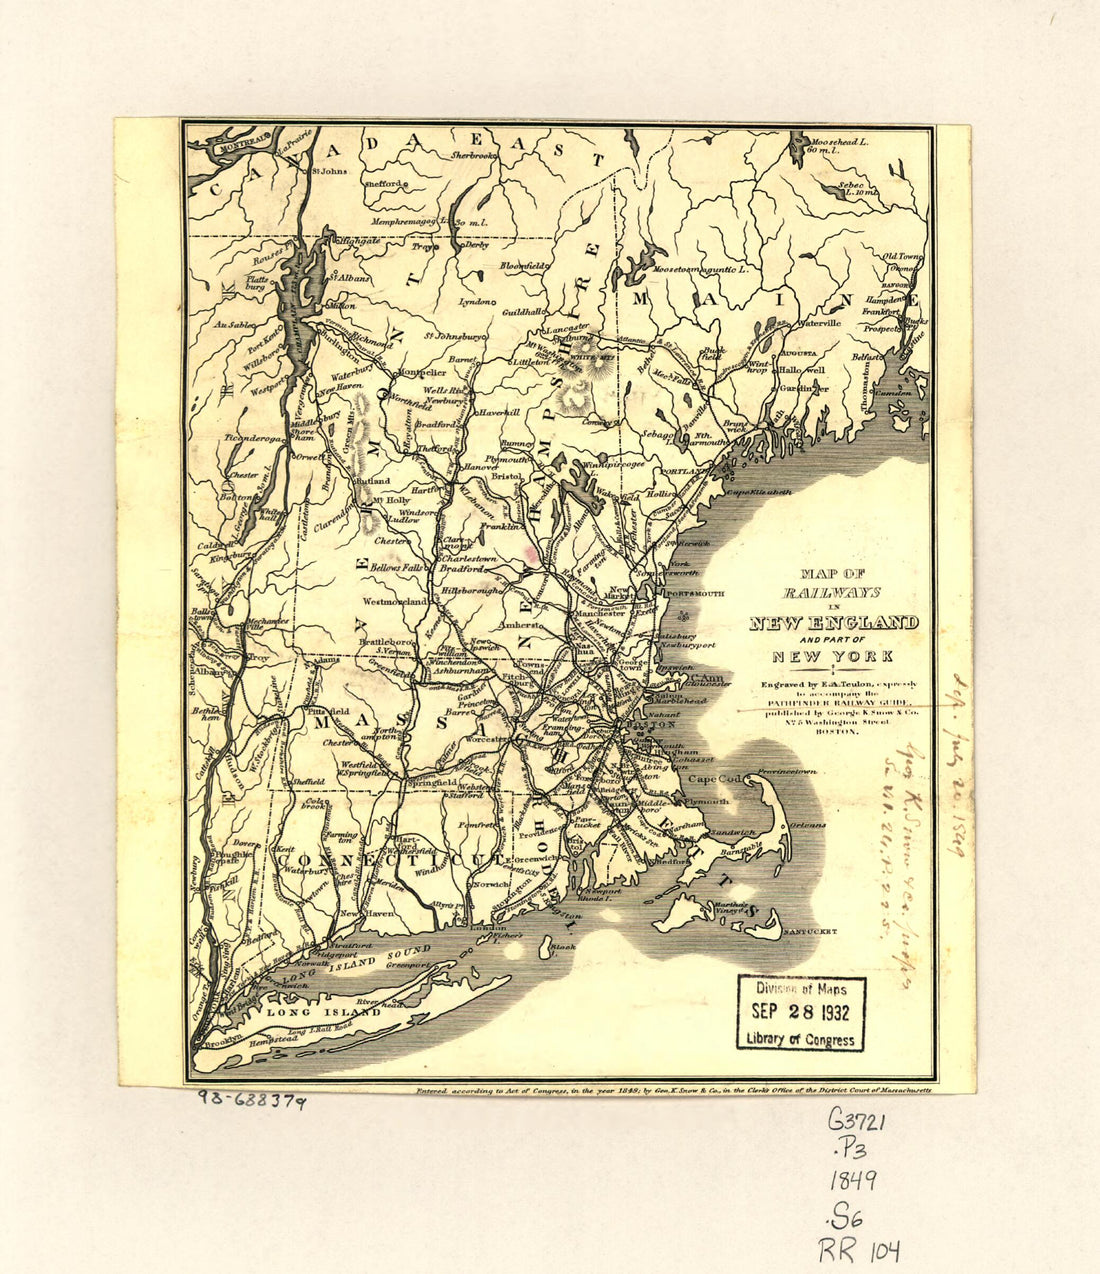 This old map of Map of Railways In New England and Part of New York; Engraved by E. A. Teulon, Expressly to Accompany the Pathfinder Railway Guide from 1849 was created by  George K. Snow &amp; Co in 1849